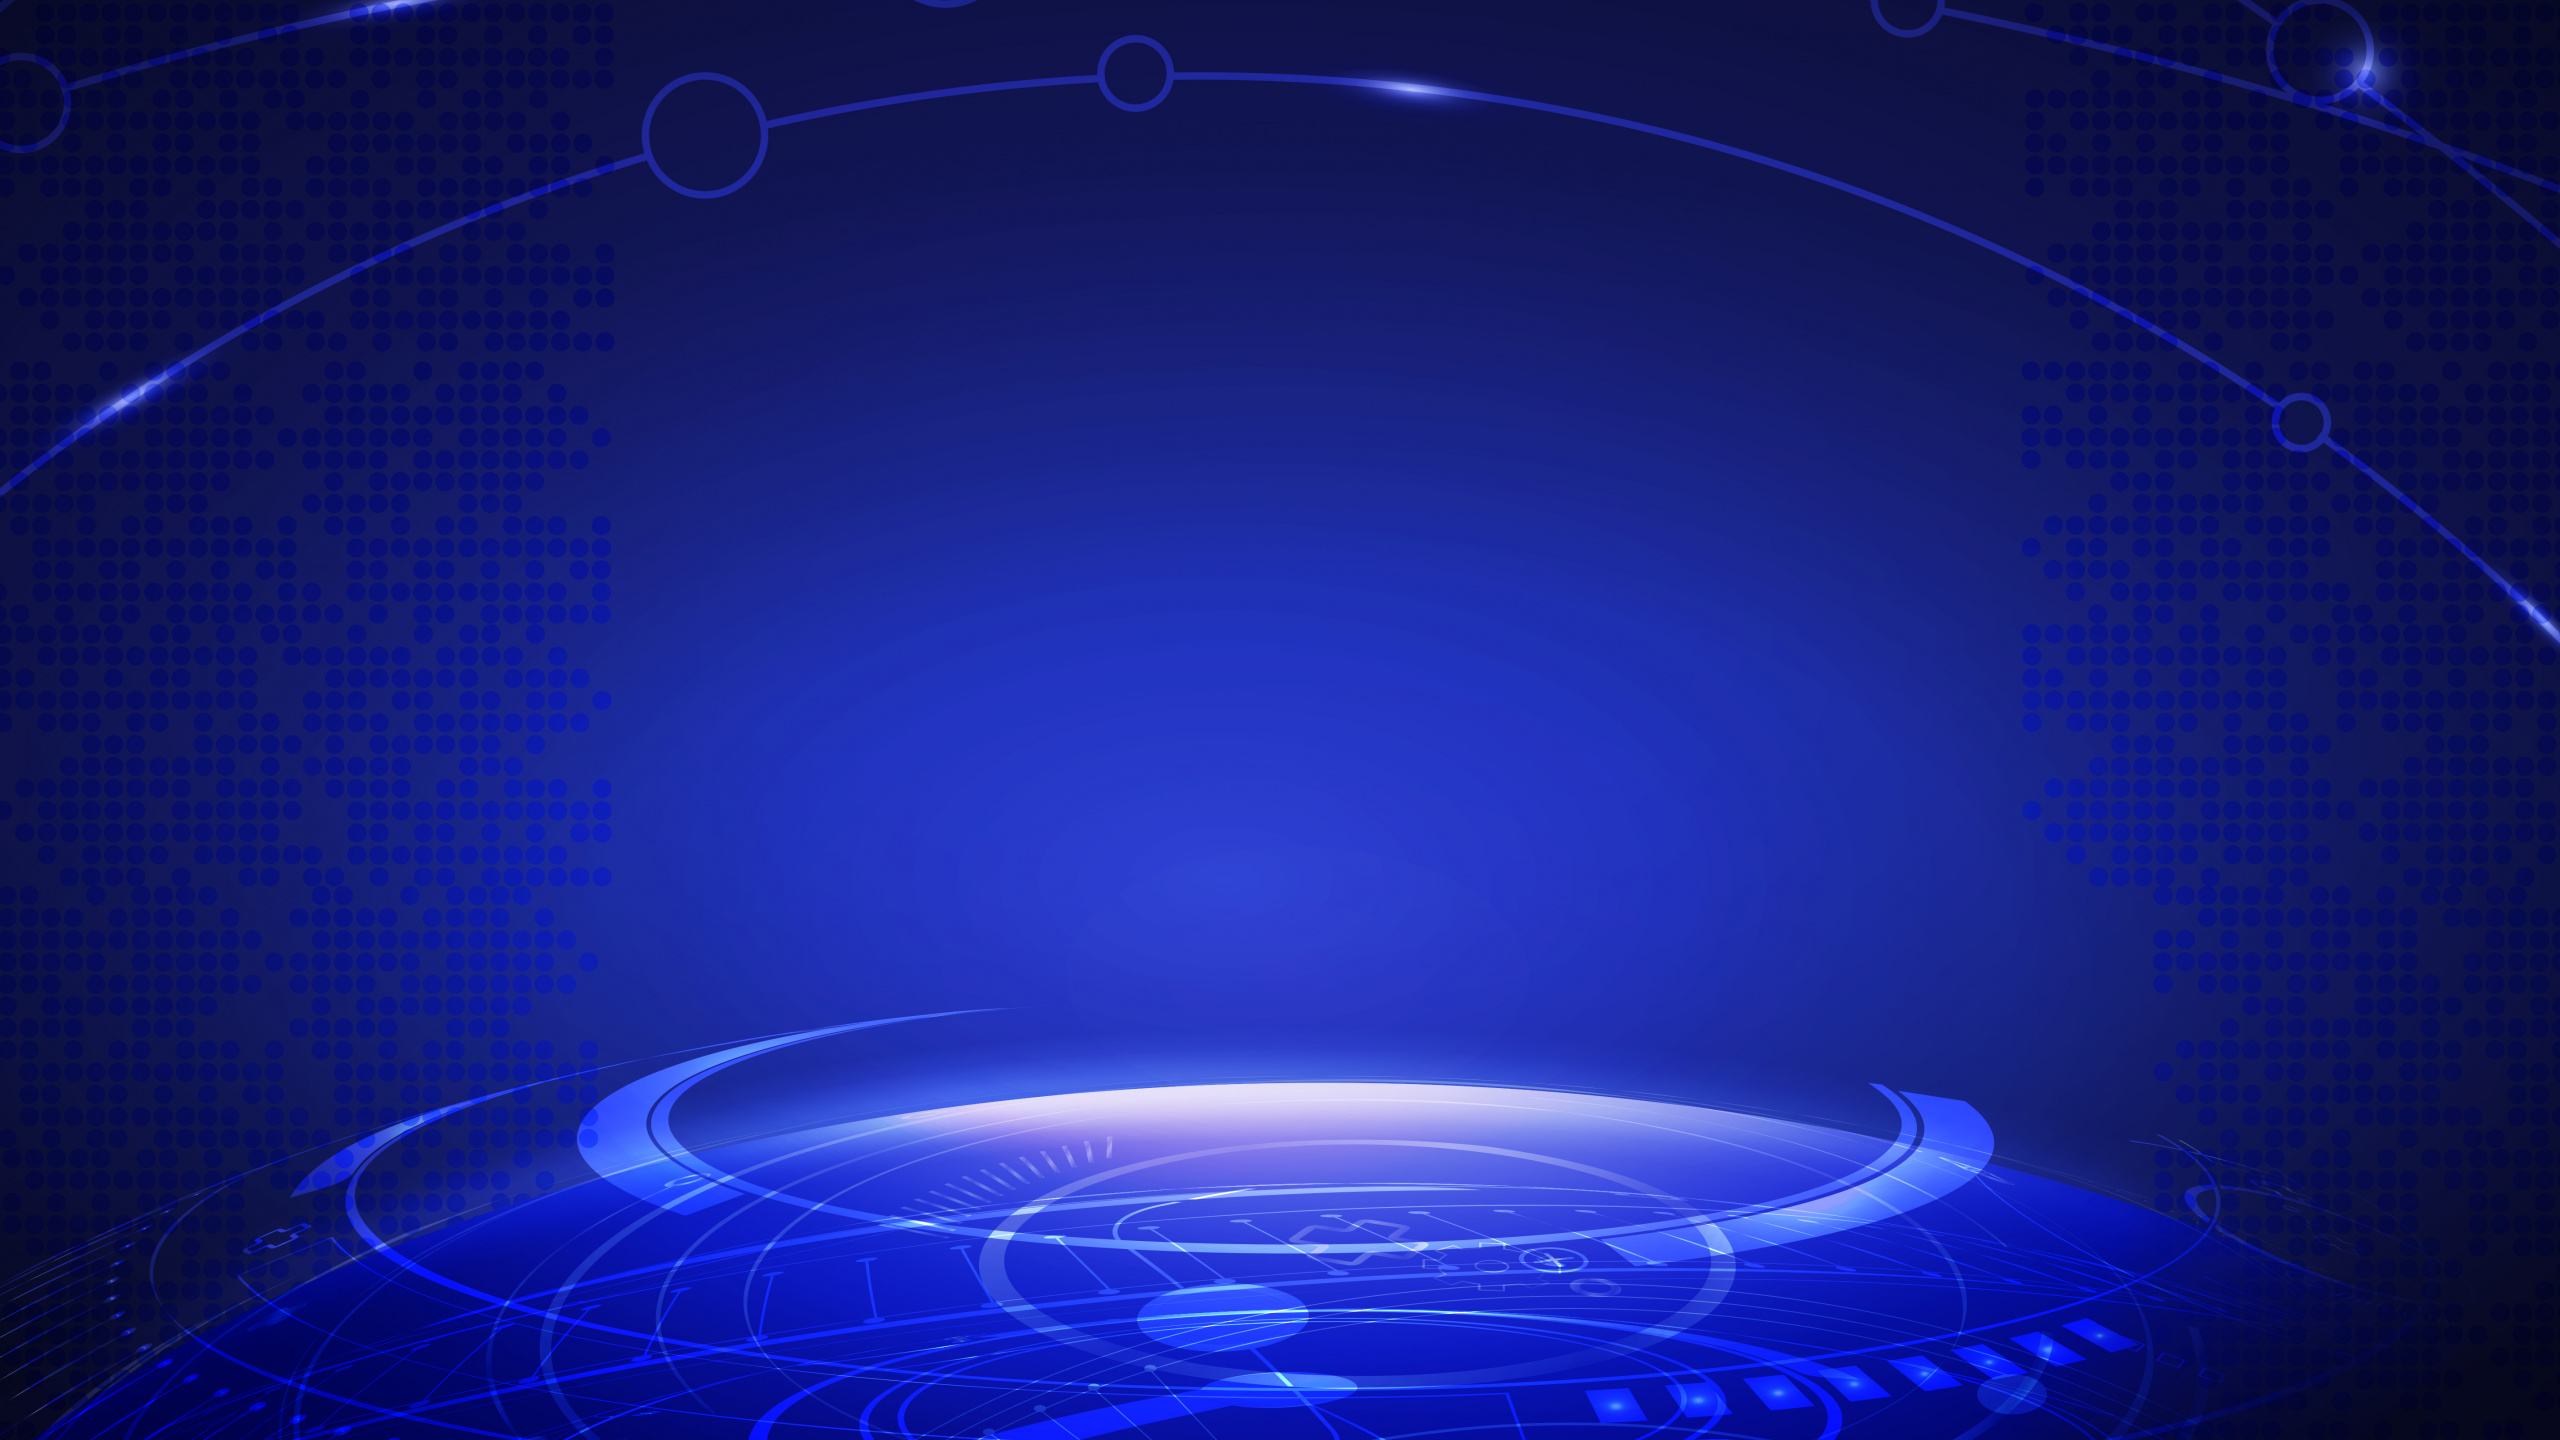 Blue and White Line Illustration. Wallpaper in 2560x1440 Resolution